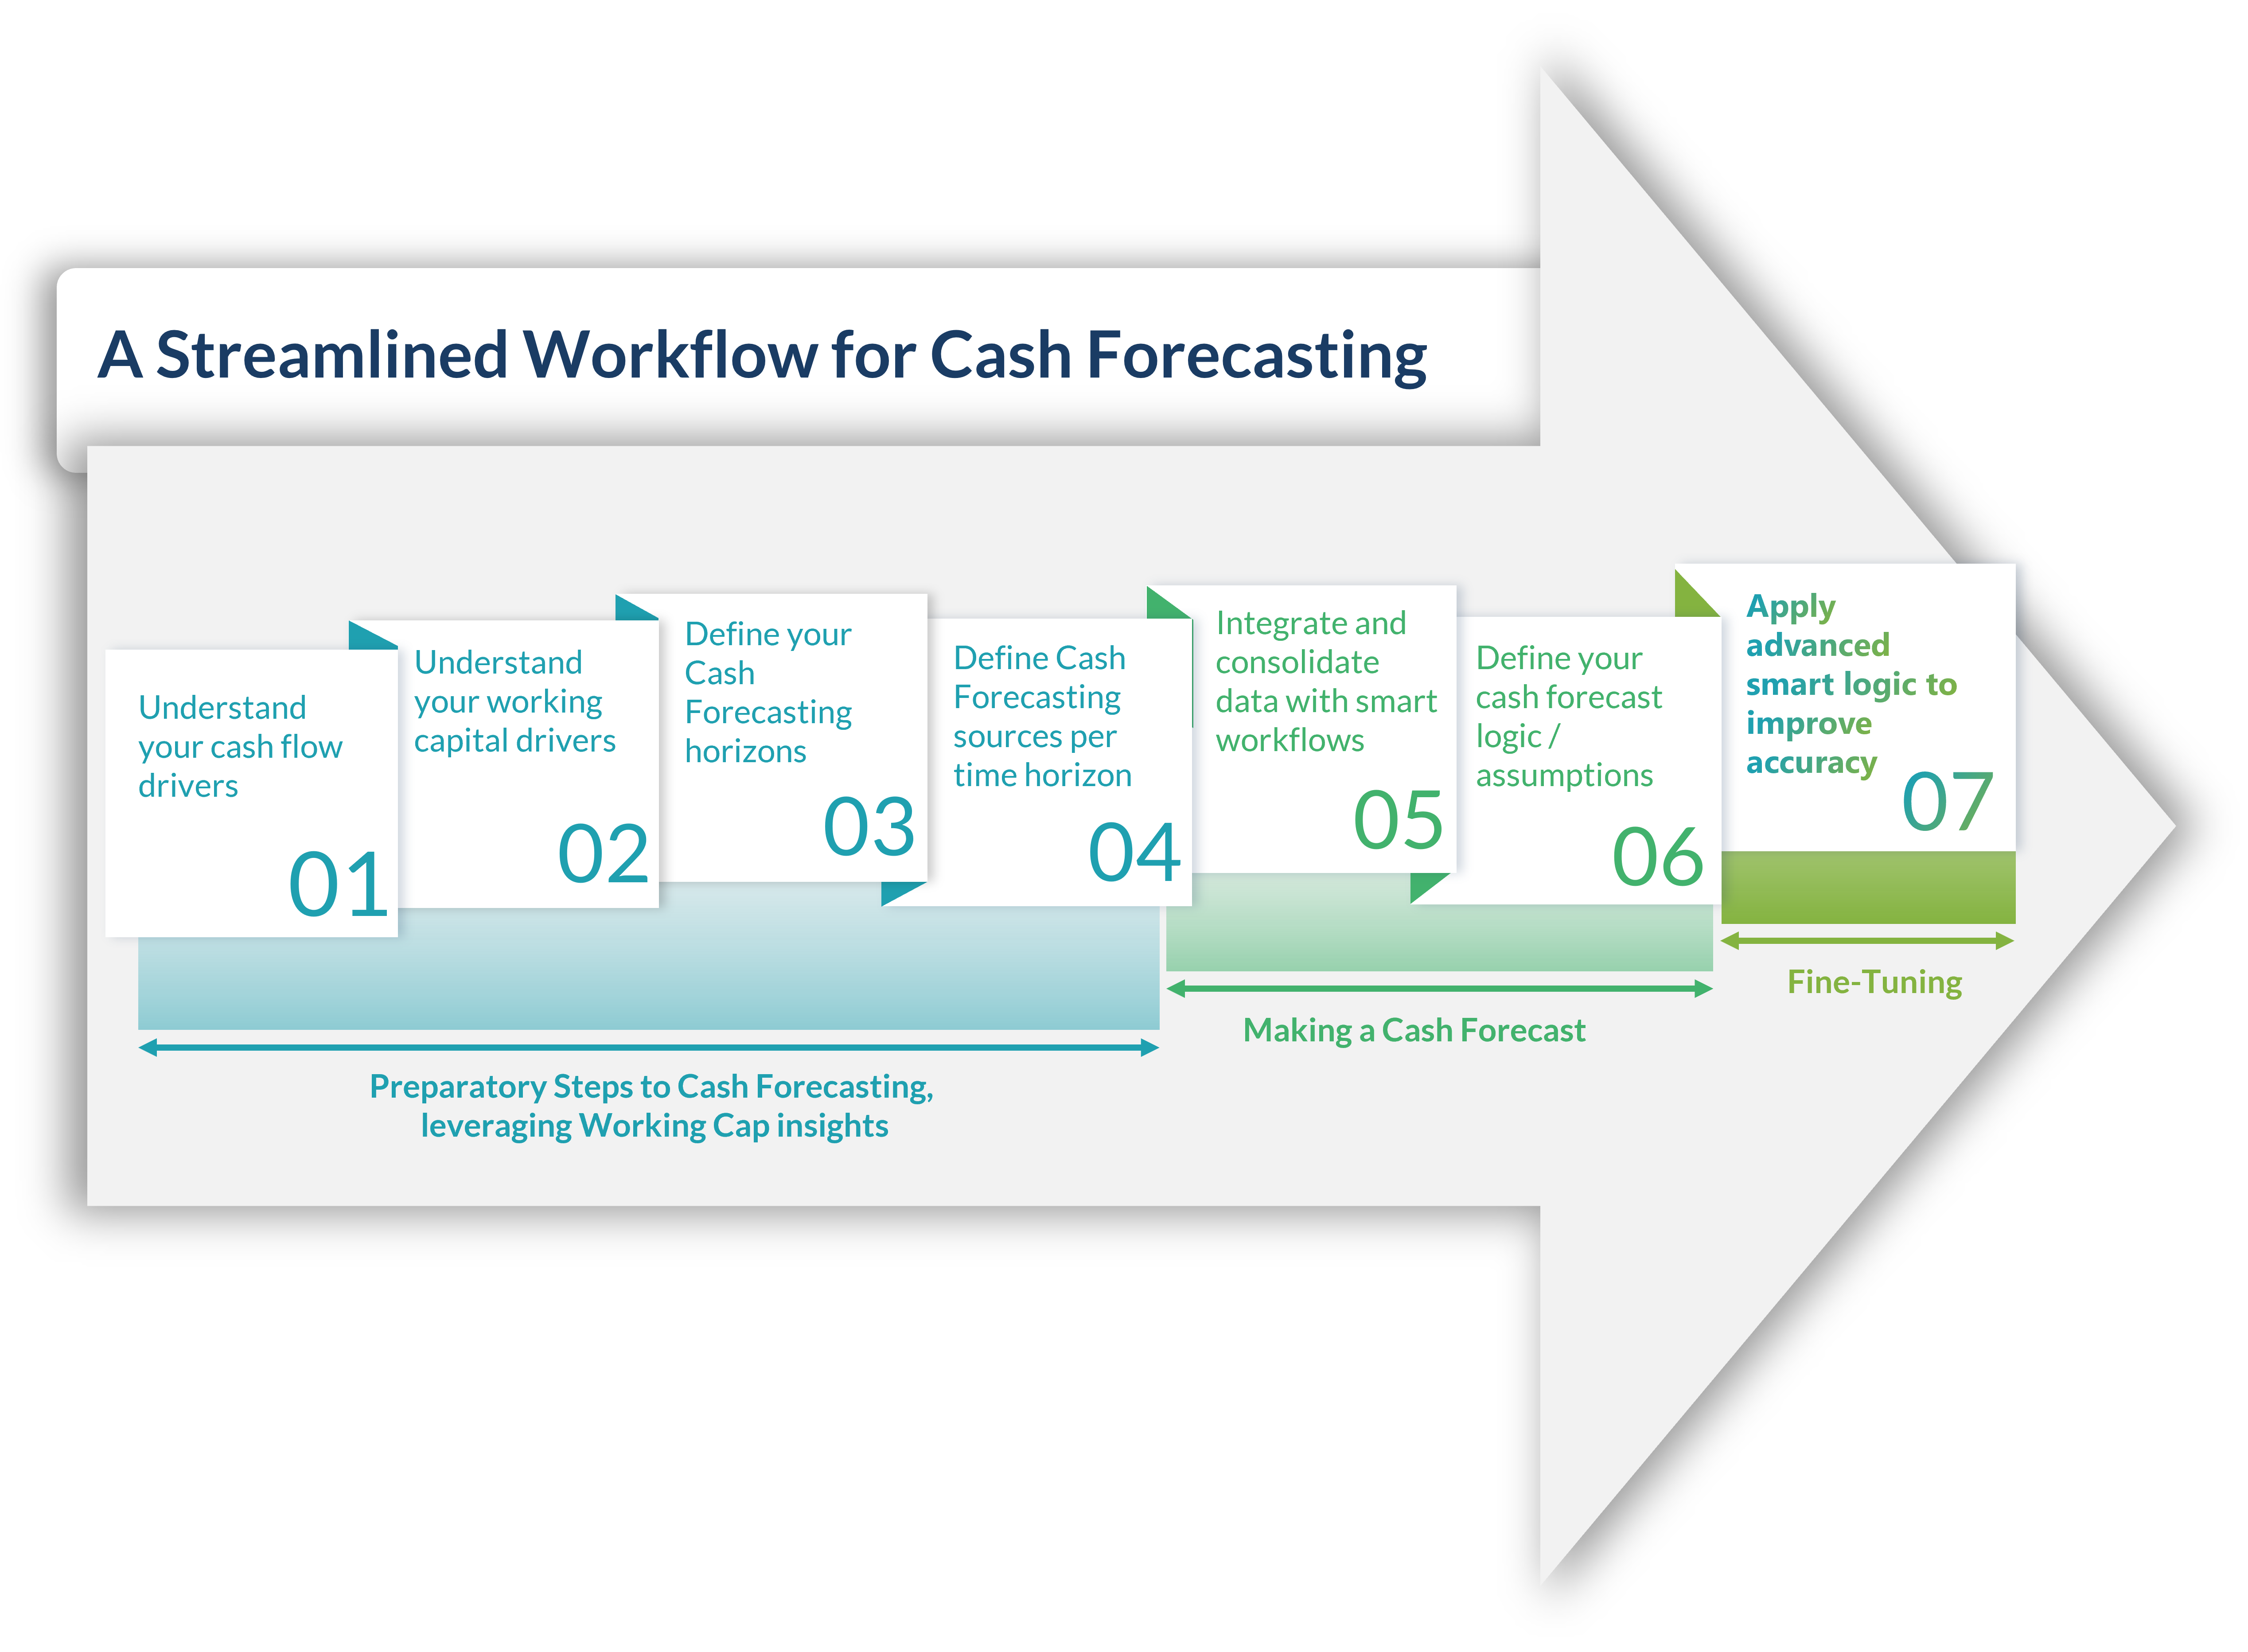 The TIS process for streamlining treasury and finance cash forecasting workflows. 